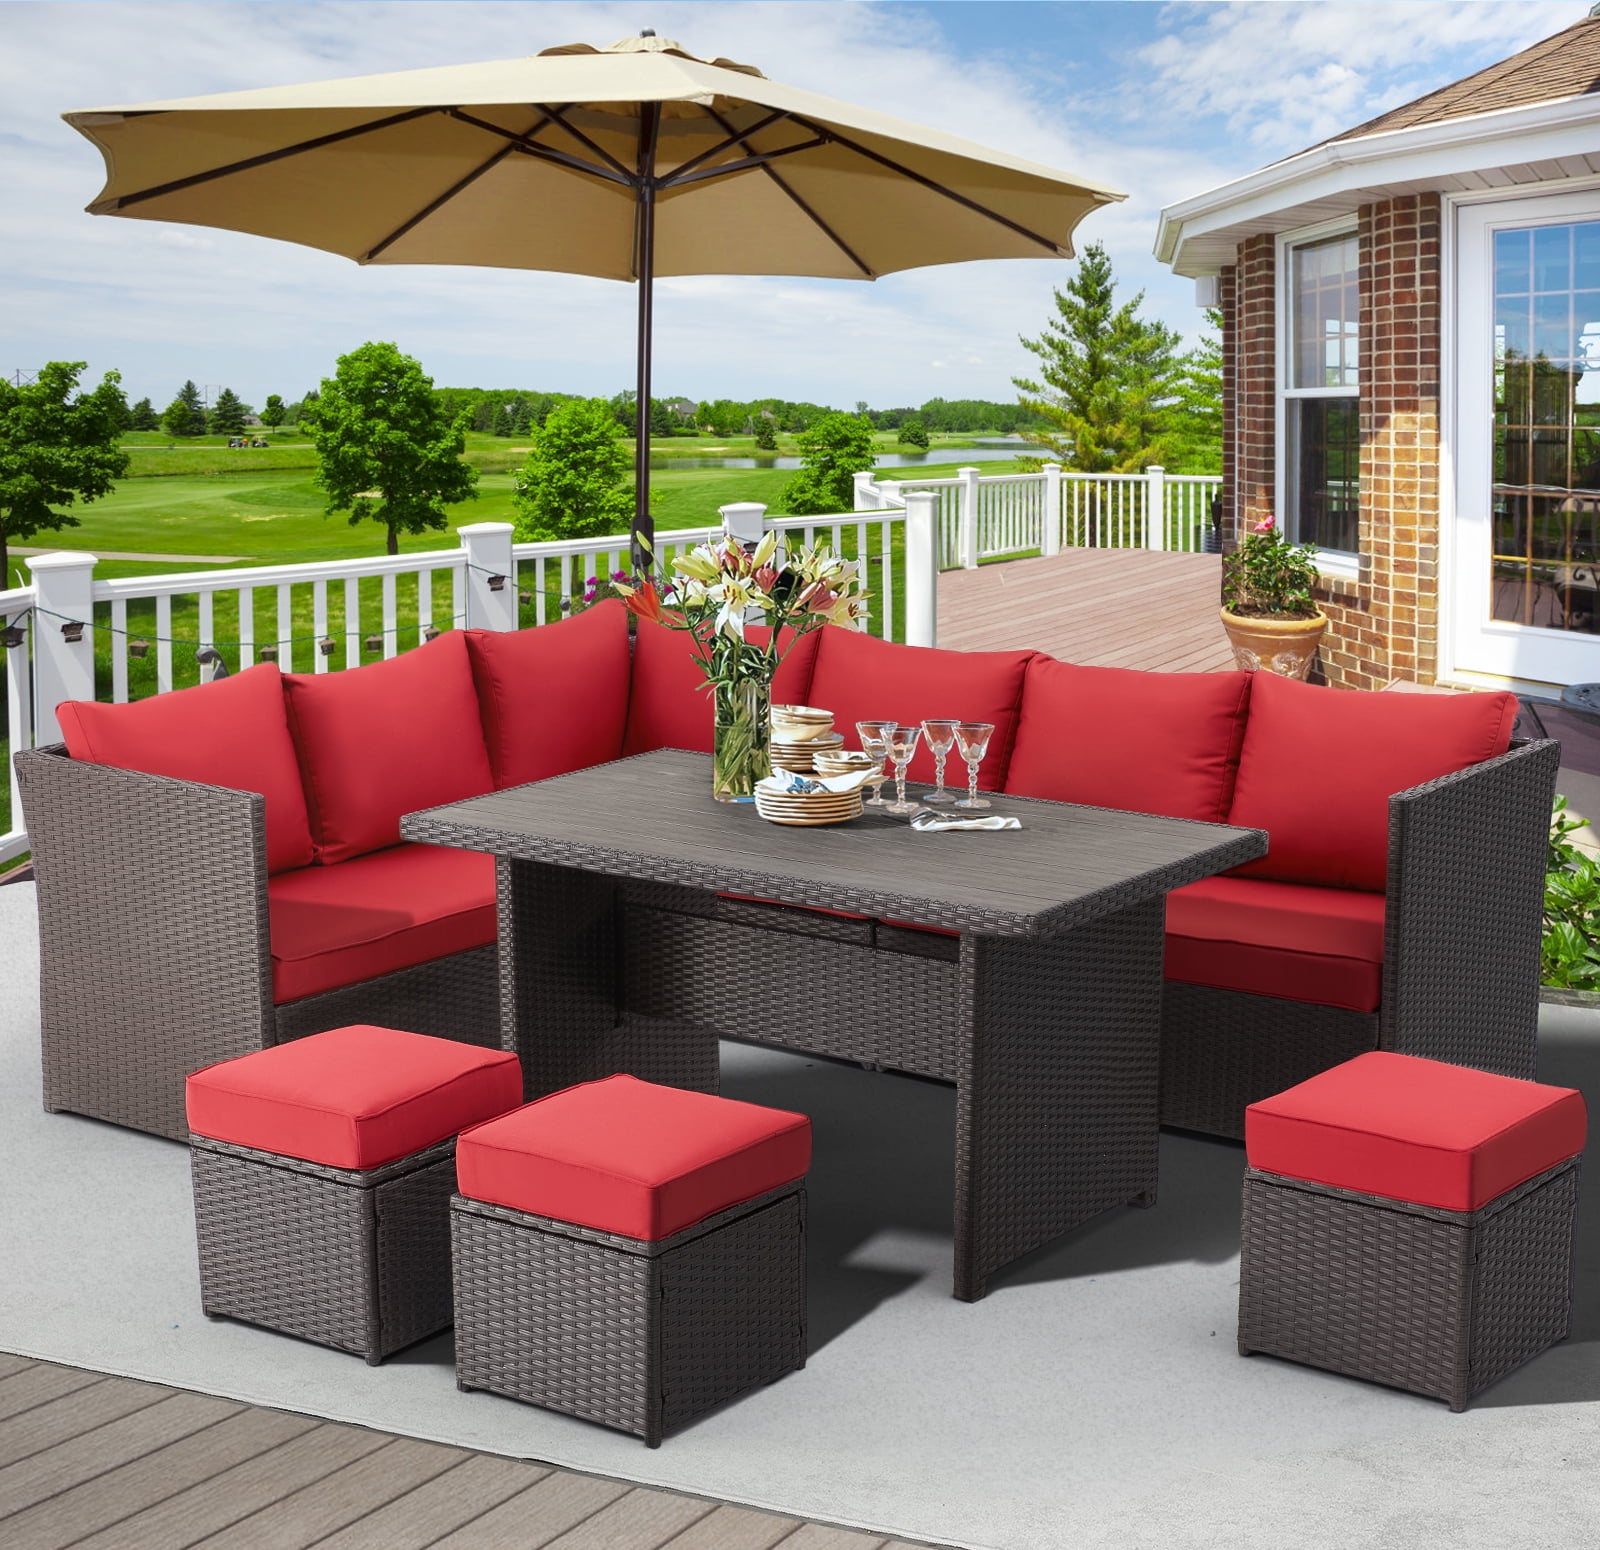 Outdoor Furniture Brentwood Tn